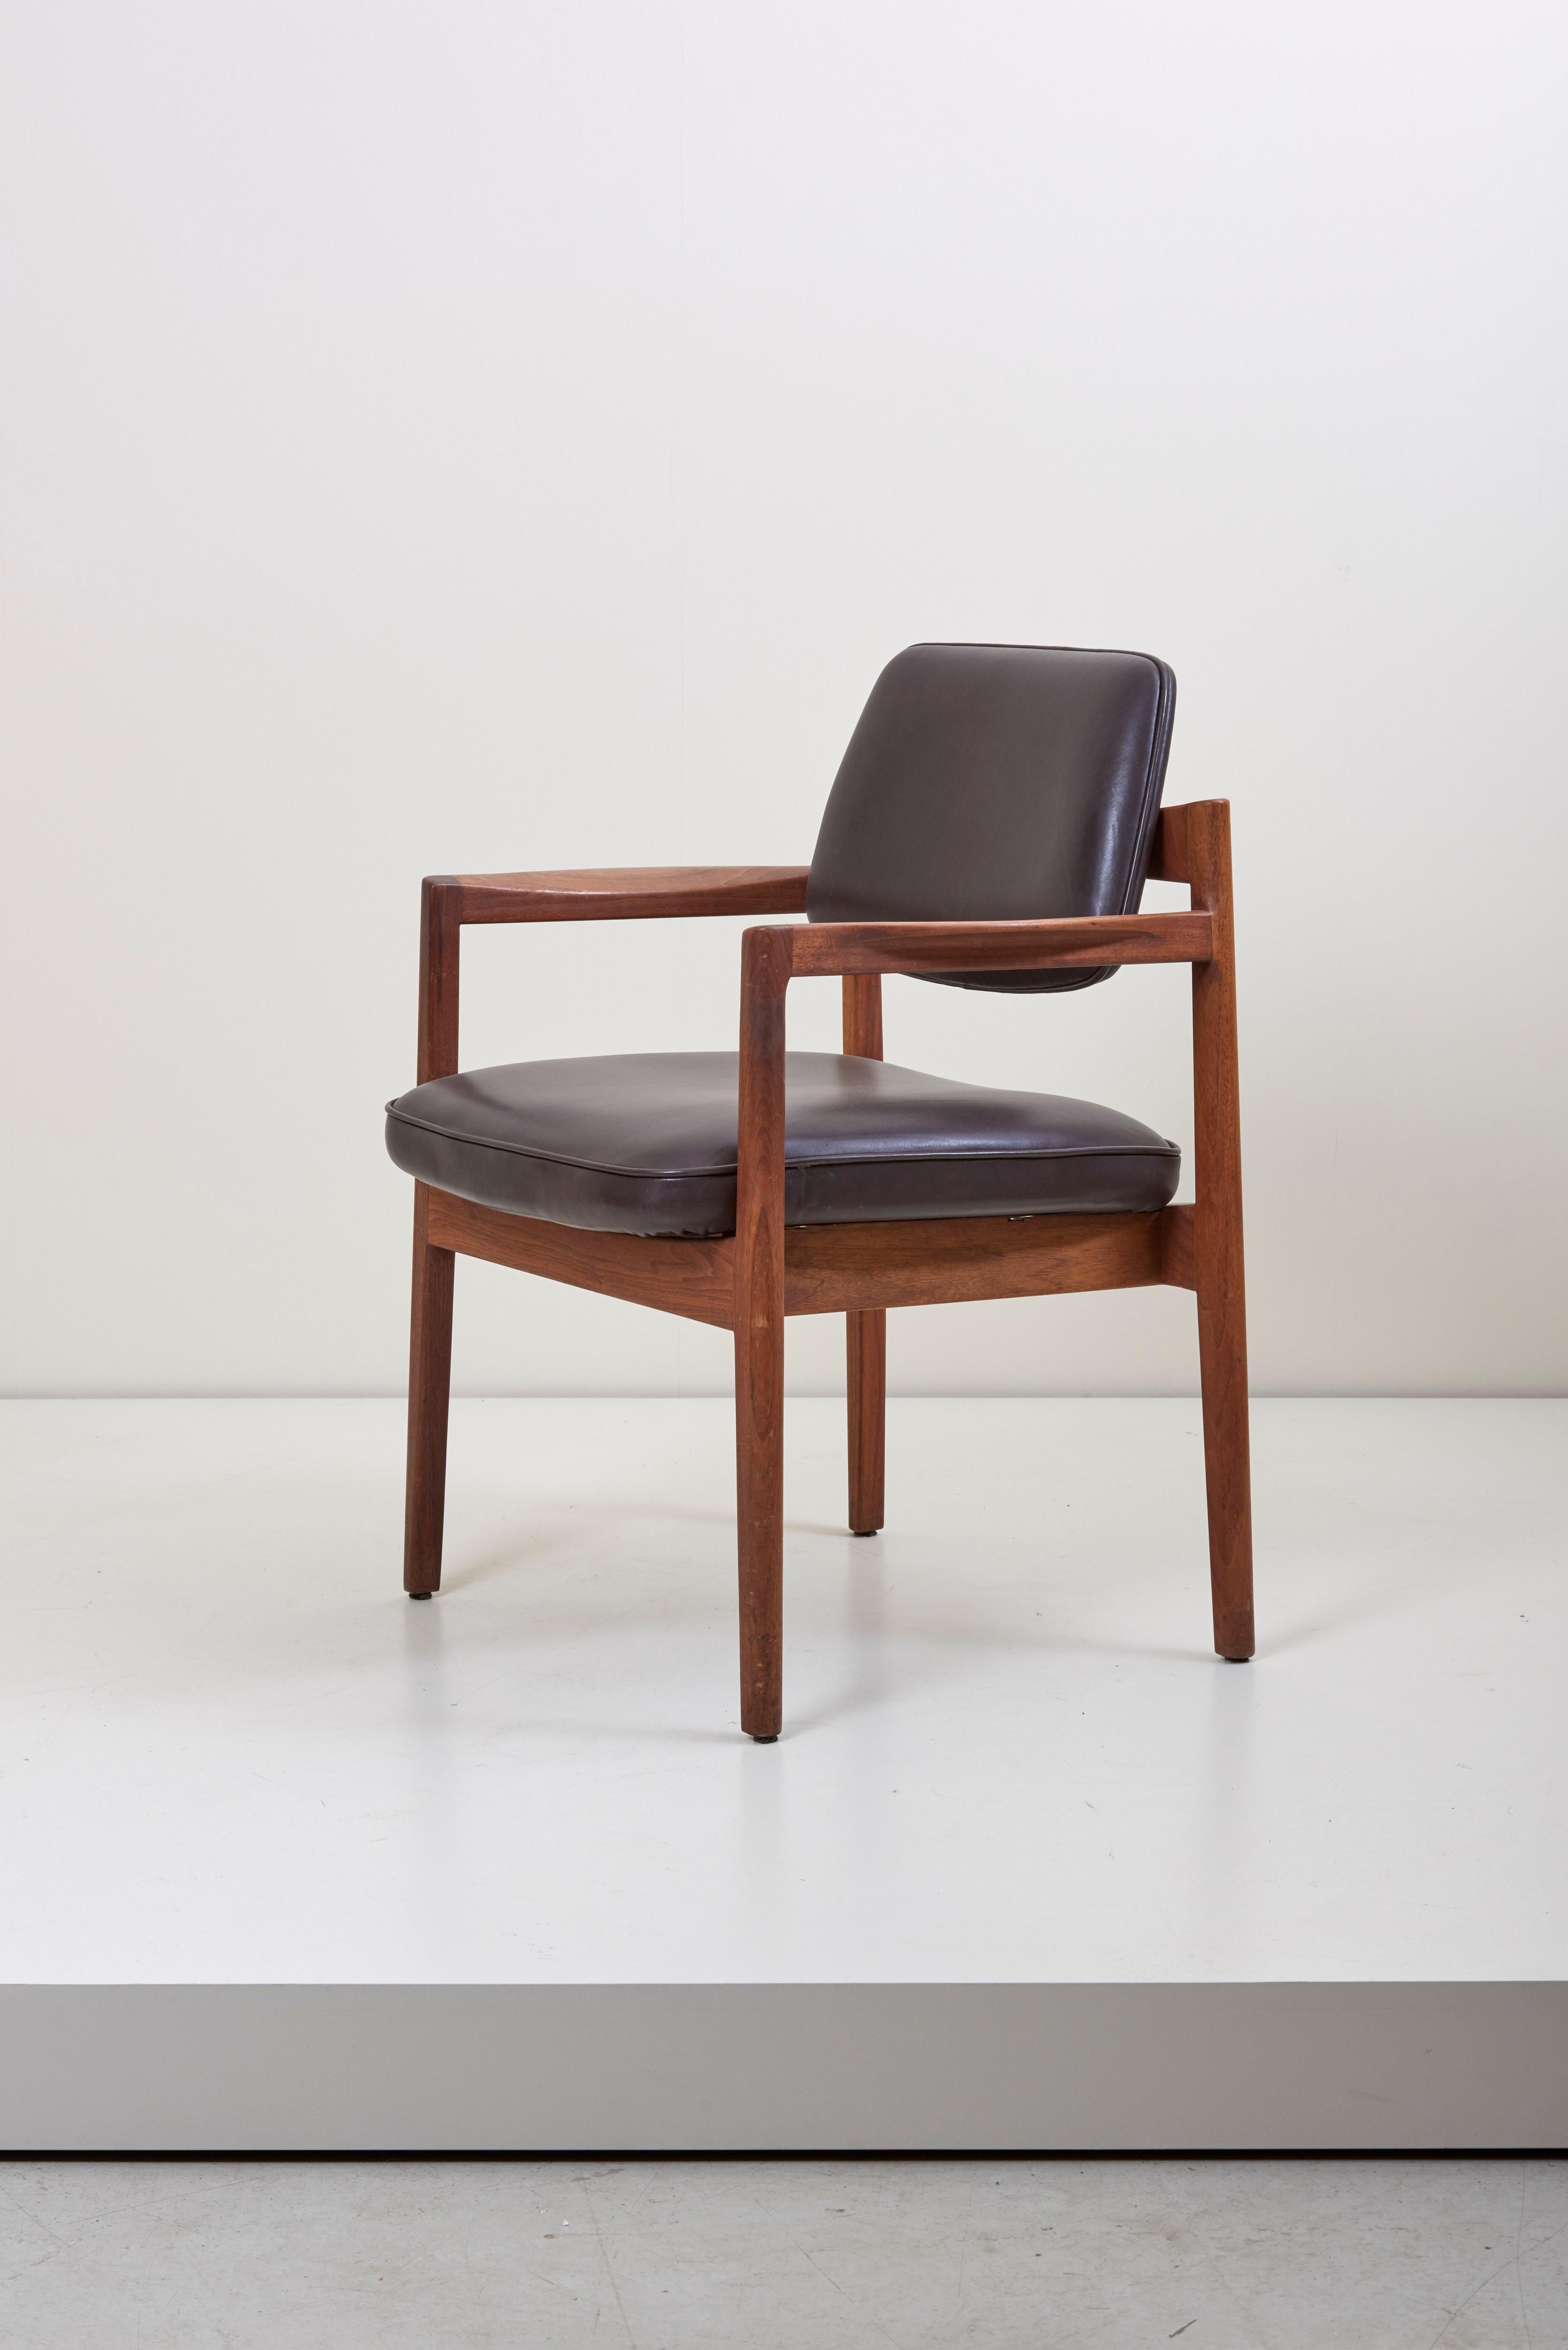 Really elegant Jens Risom armchair in solid walnut and high quality aniline dark brown leather by Sorensen.